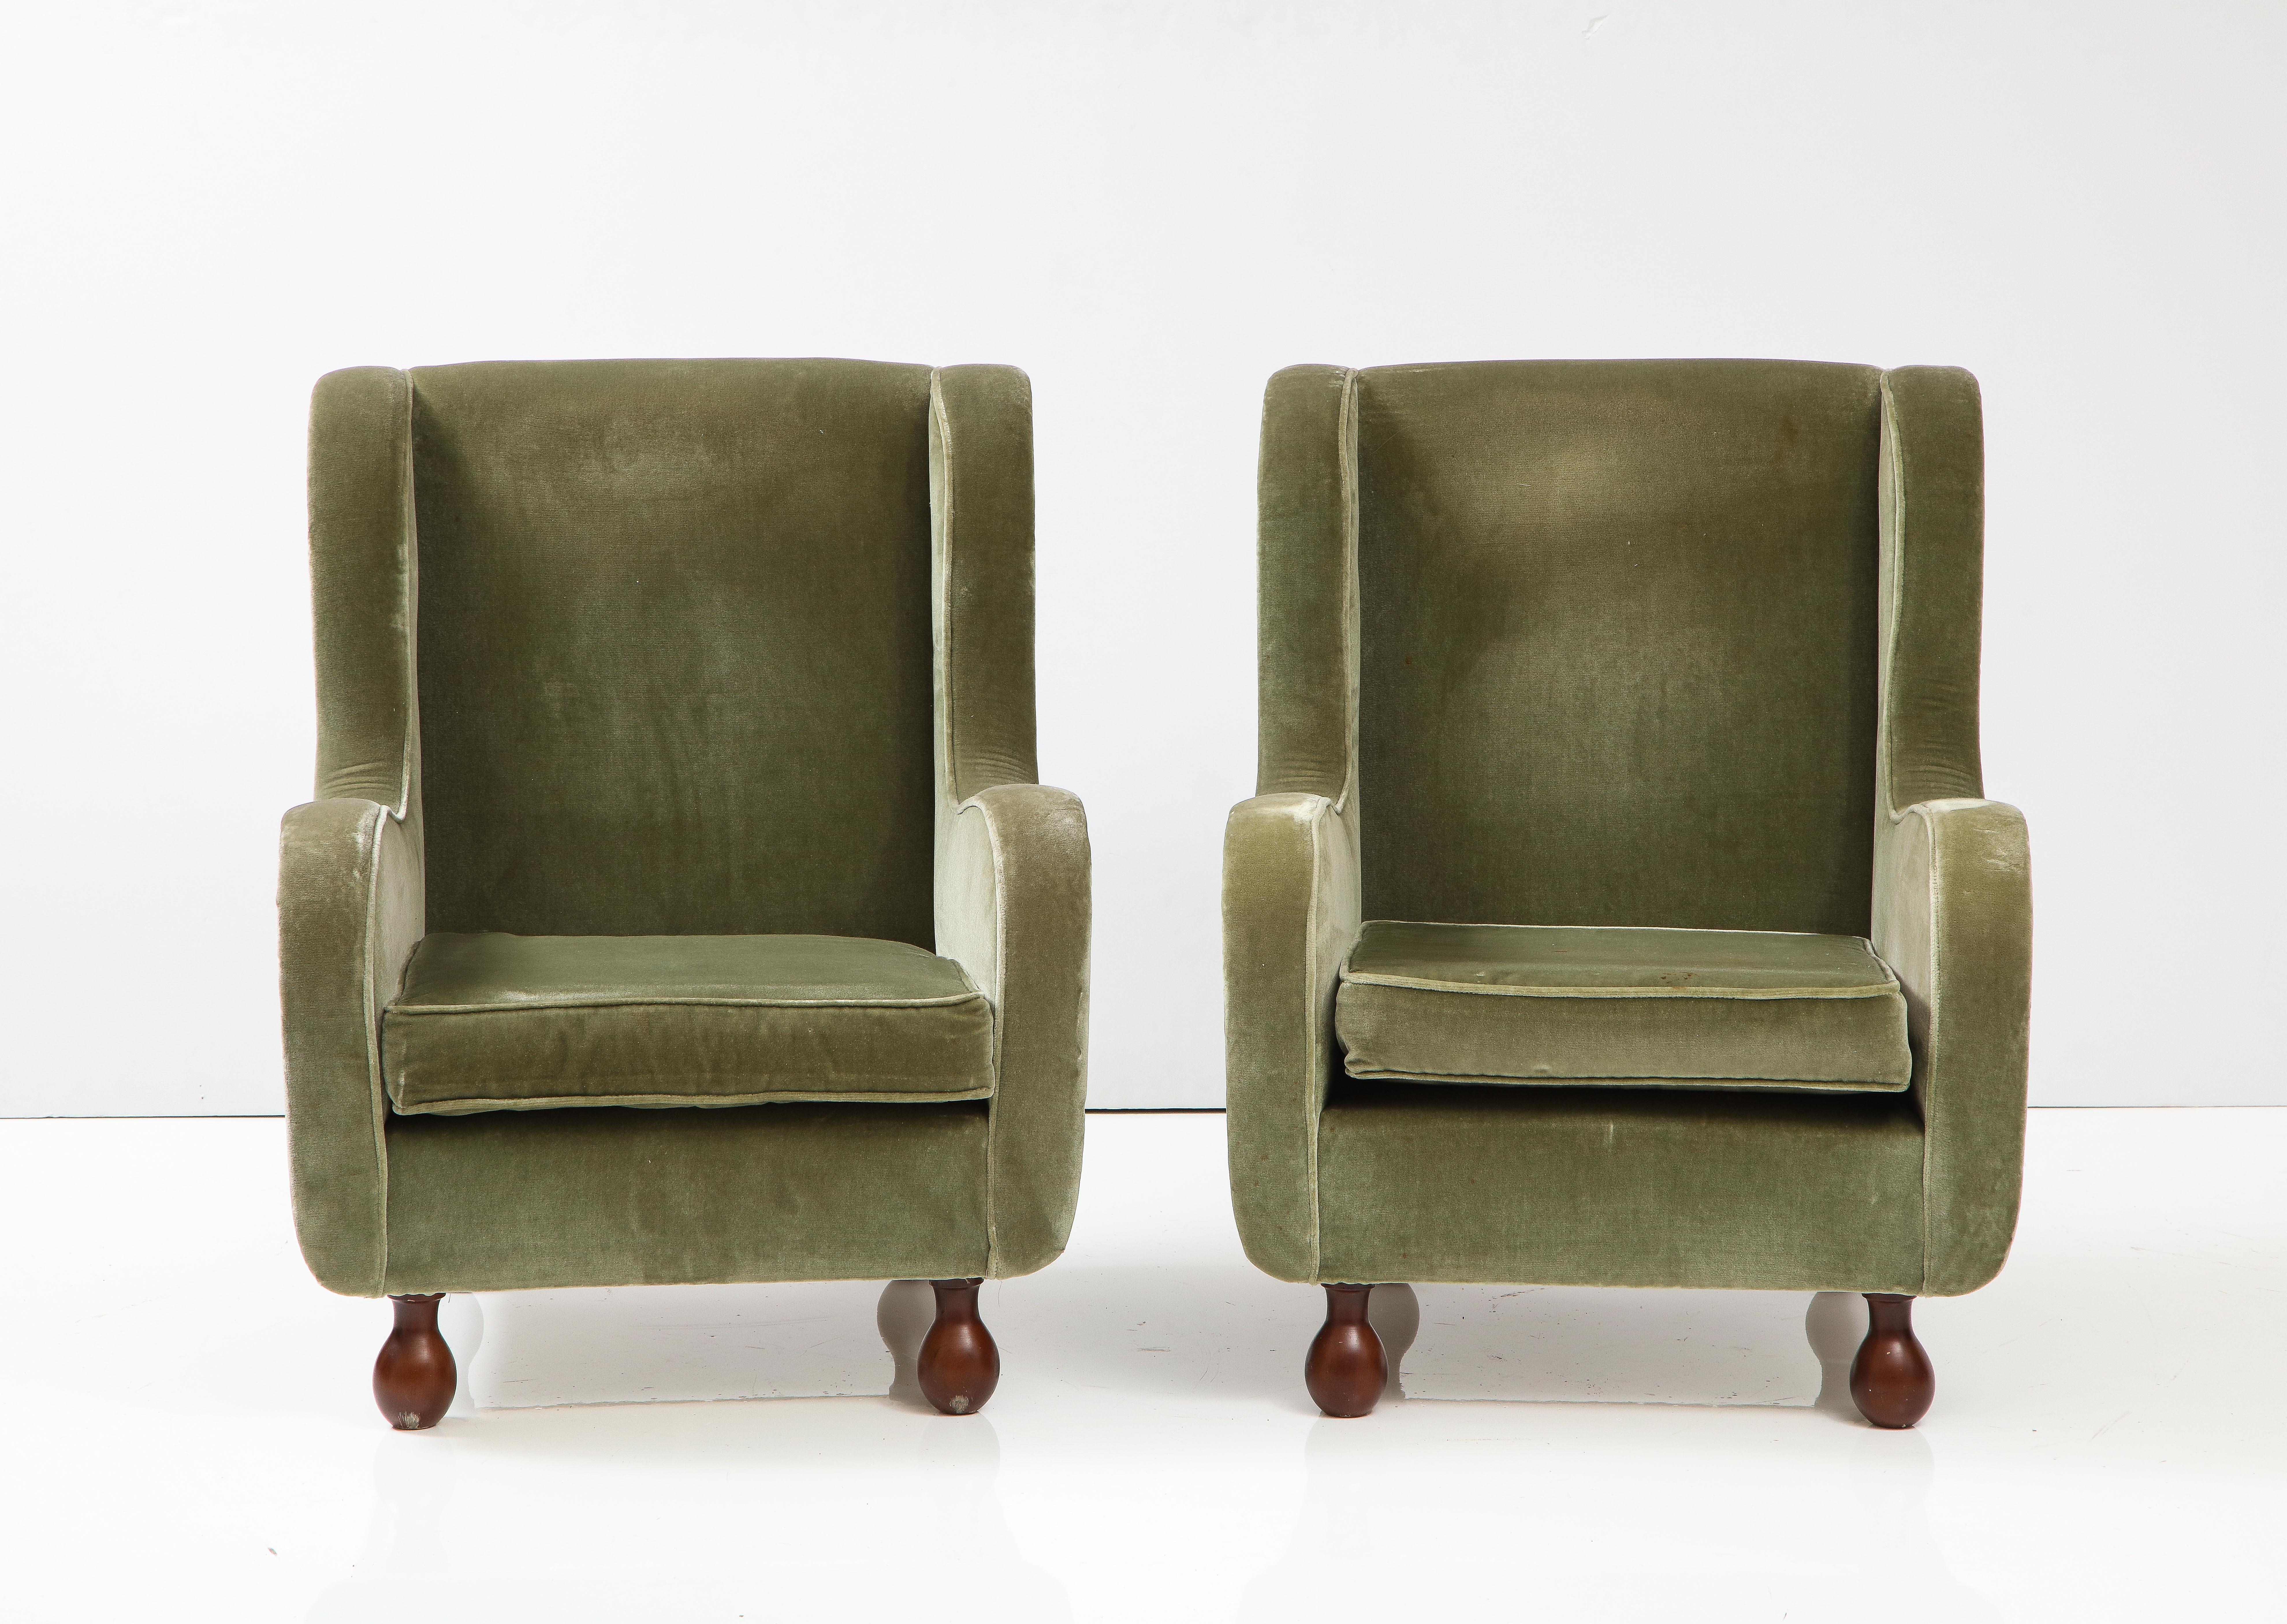 A charming pair of Italian 1940's armchairs, upholstered in their original seafoam green velvet, with beautifully curved arms, rectangular backs; the whole supported on walnut bun feet. Also available: a pair of slipper chairs and settee. 
Northern